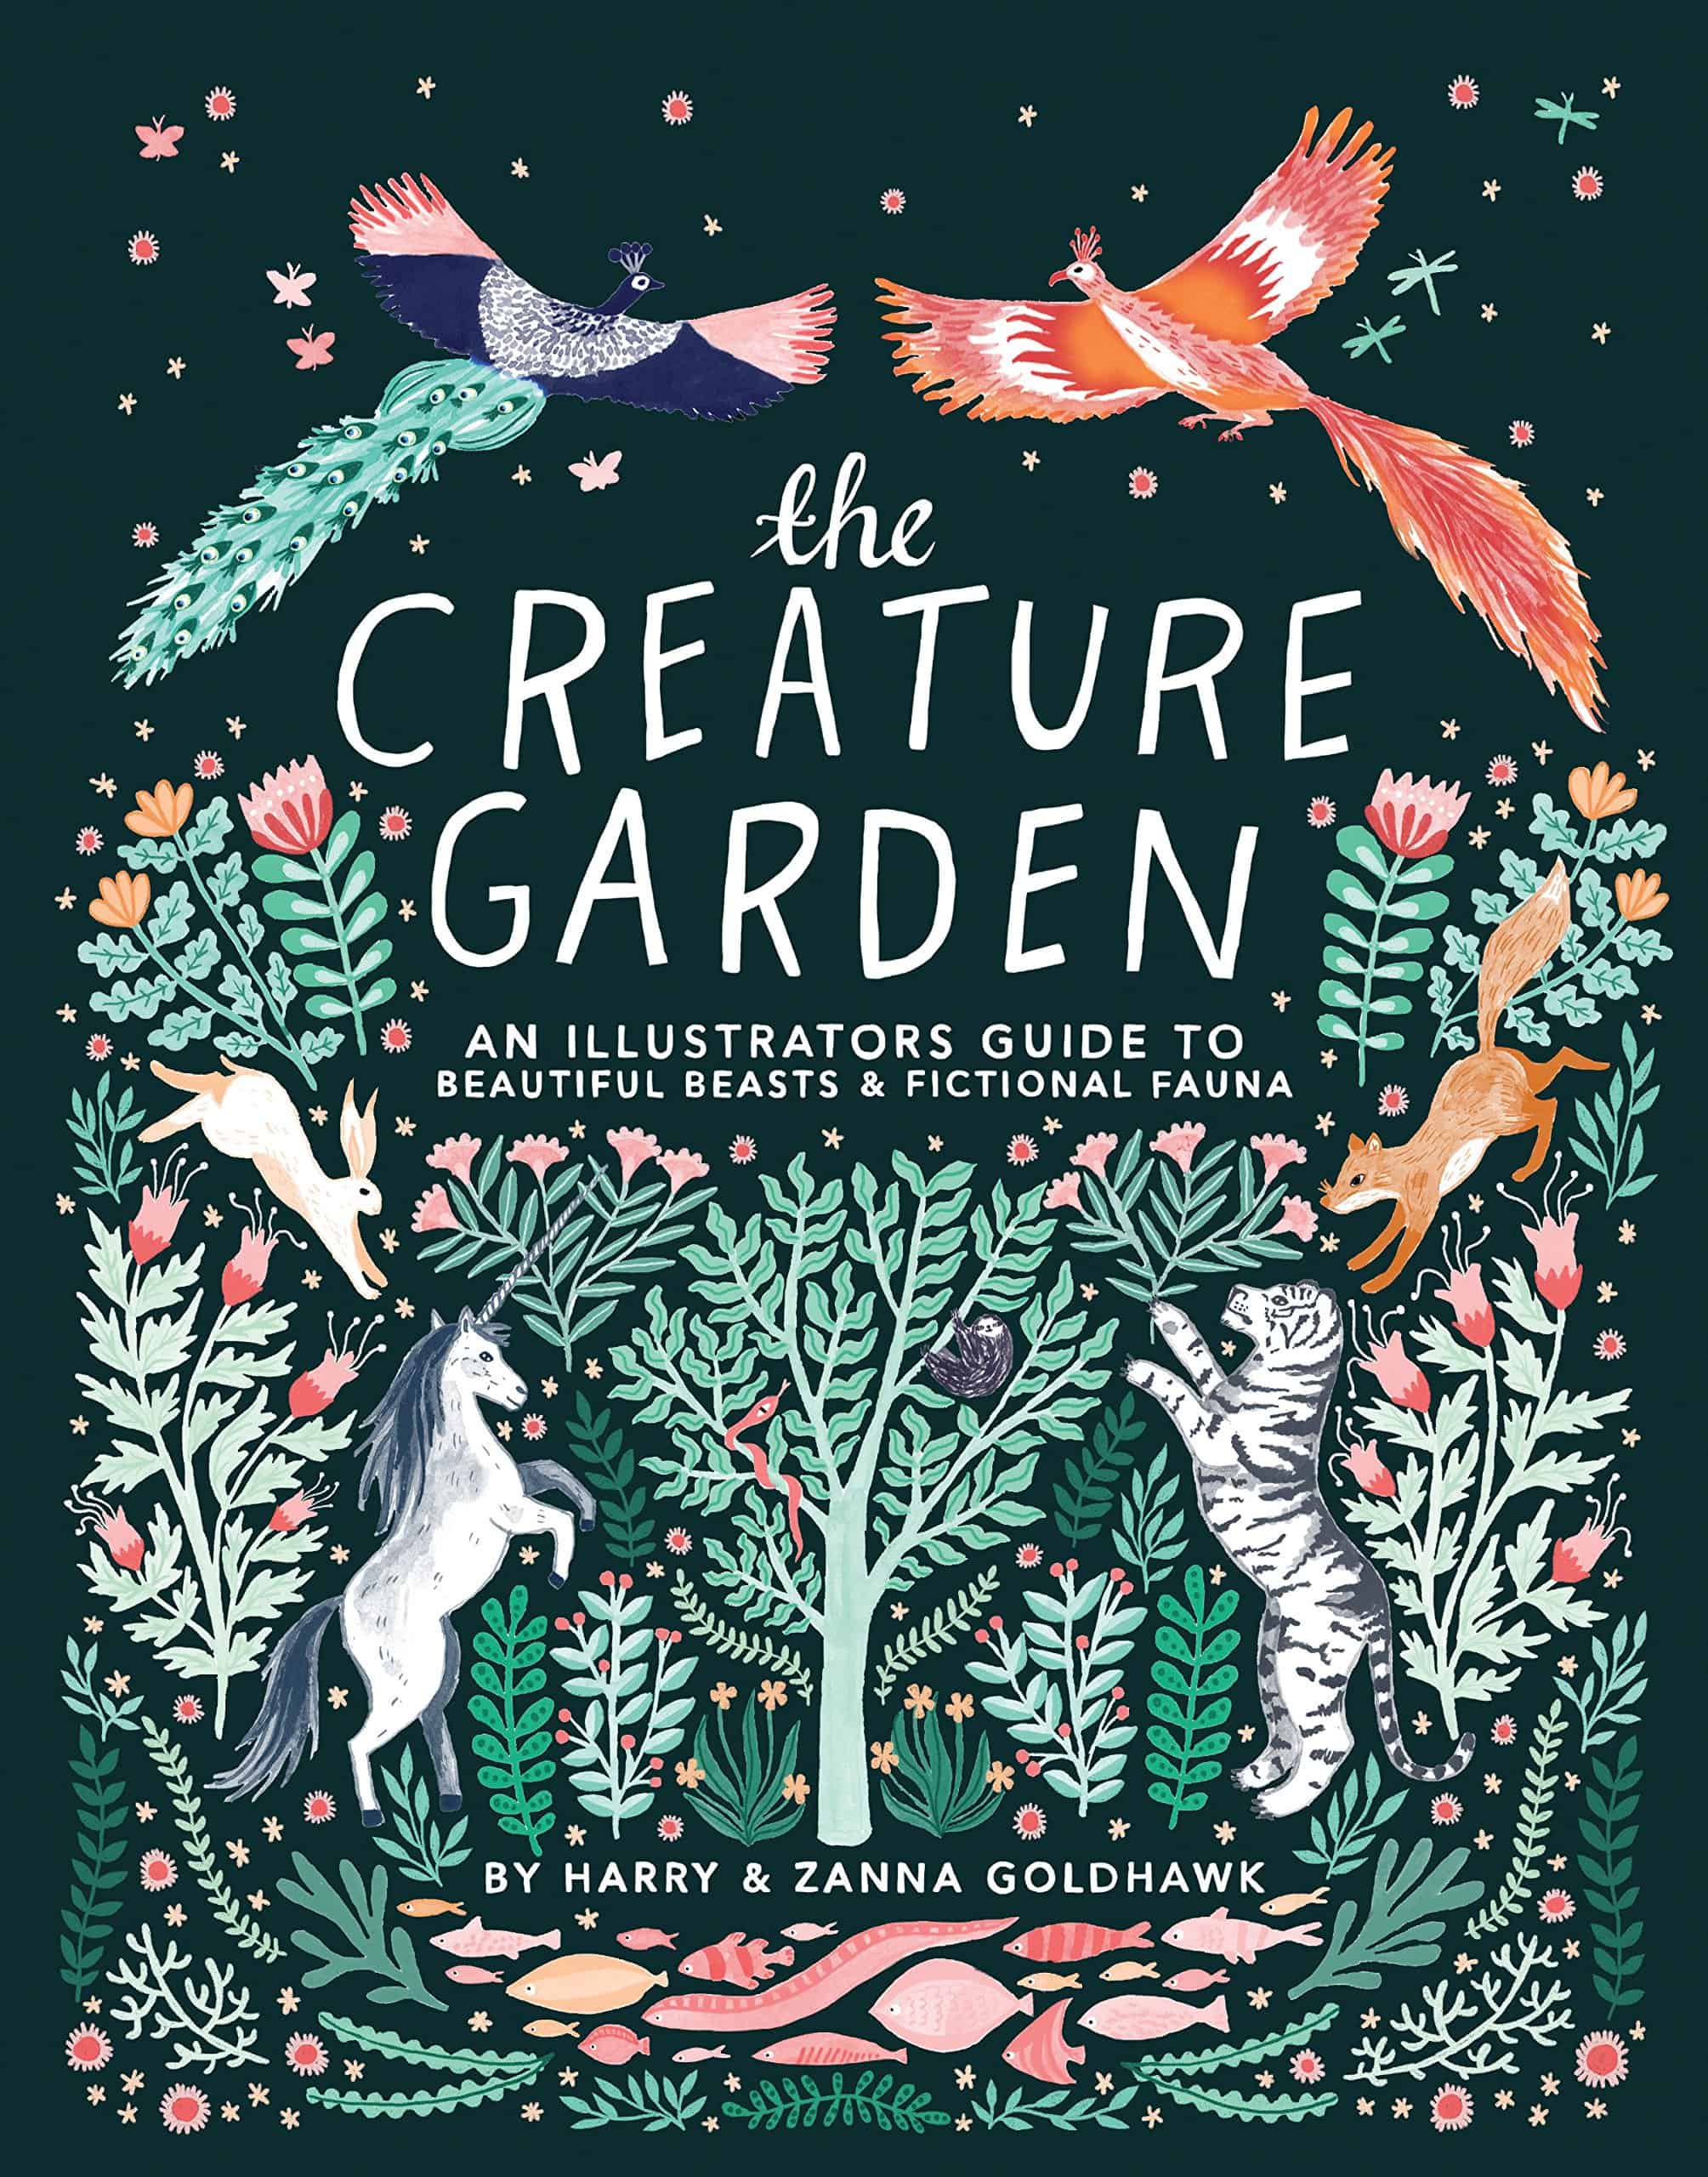 The Creature Garden by Harry and Zanna Goldhawk